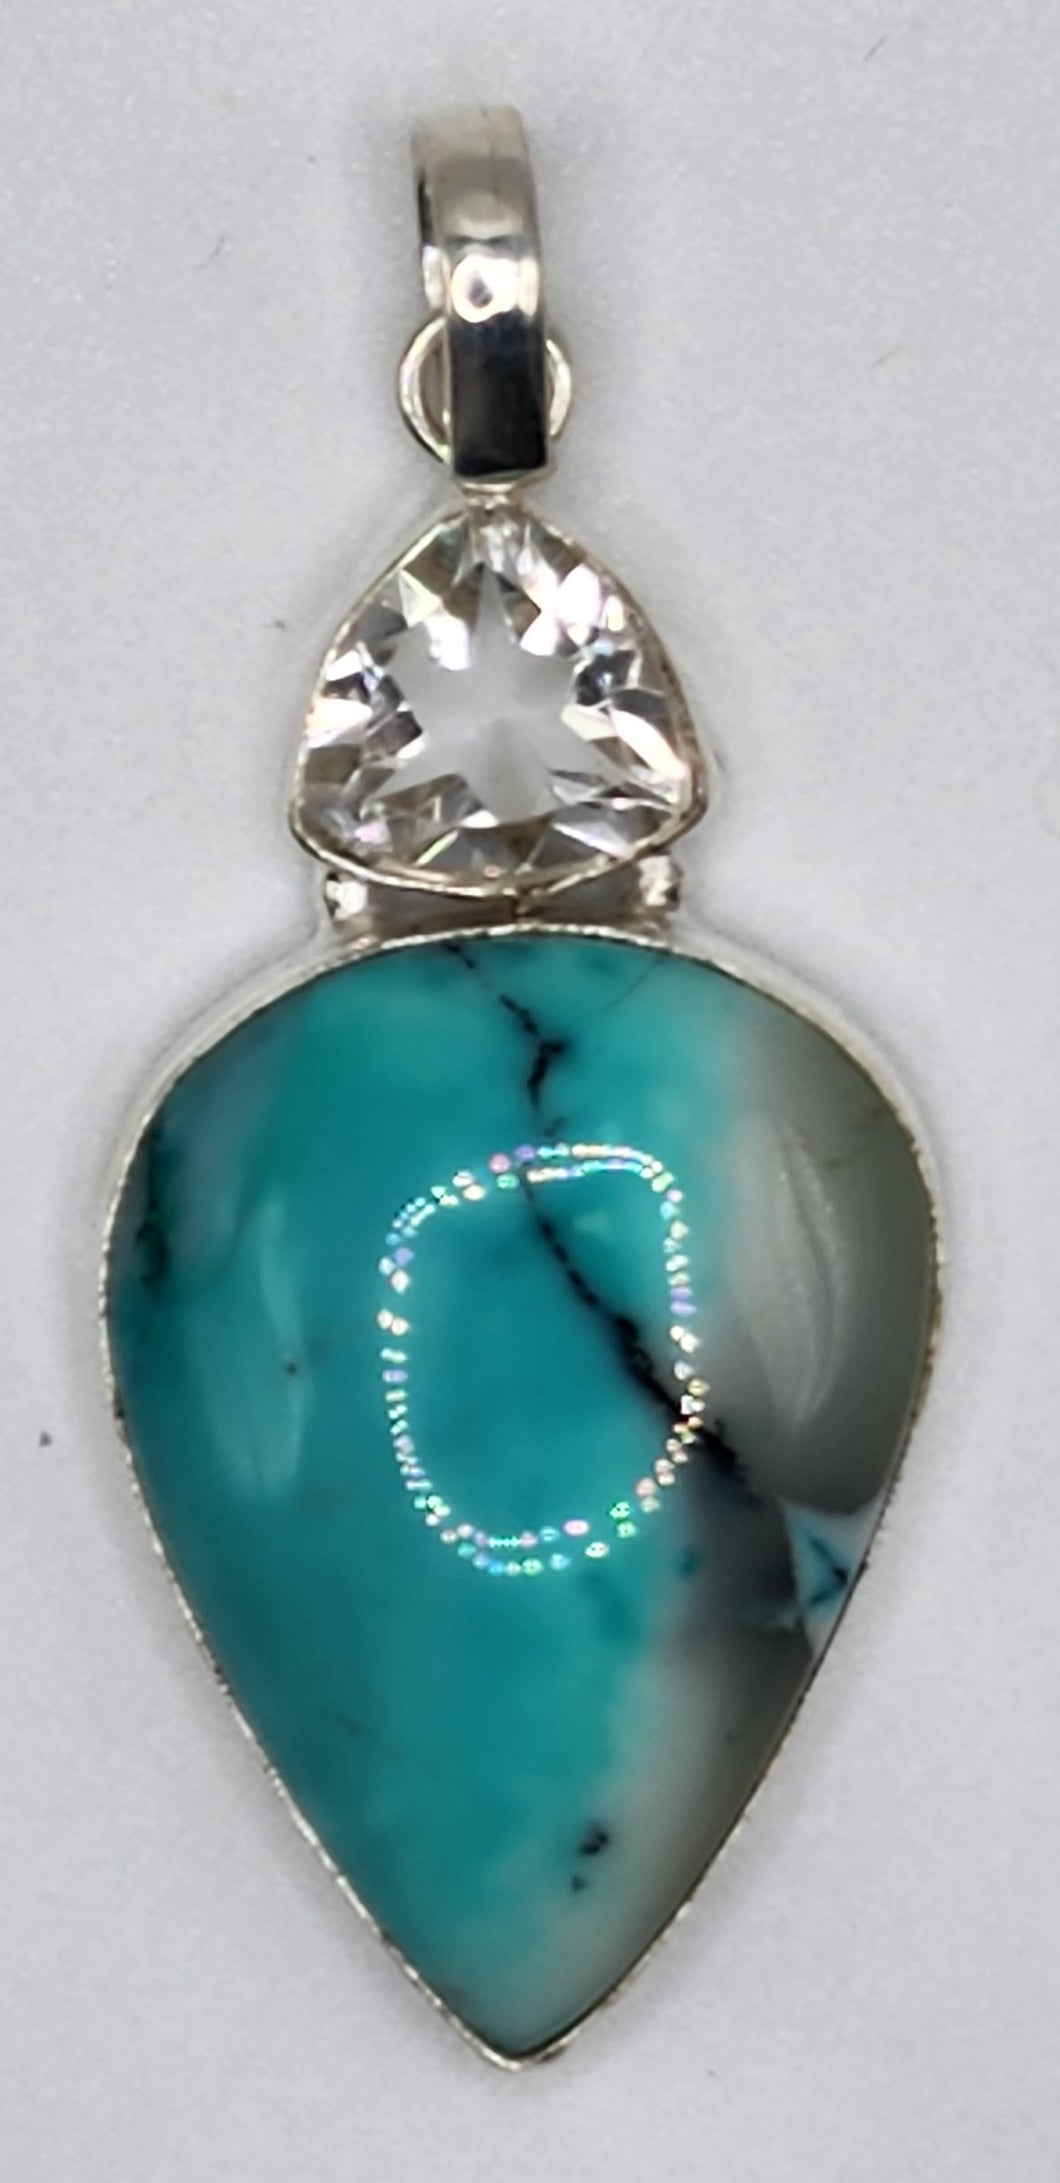 Pear Shaped Blue Peruvian Opal and Crystal Quartz Gemstone Pendant Set in 925 Sterling Silver